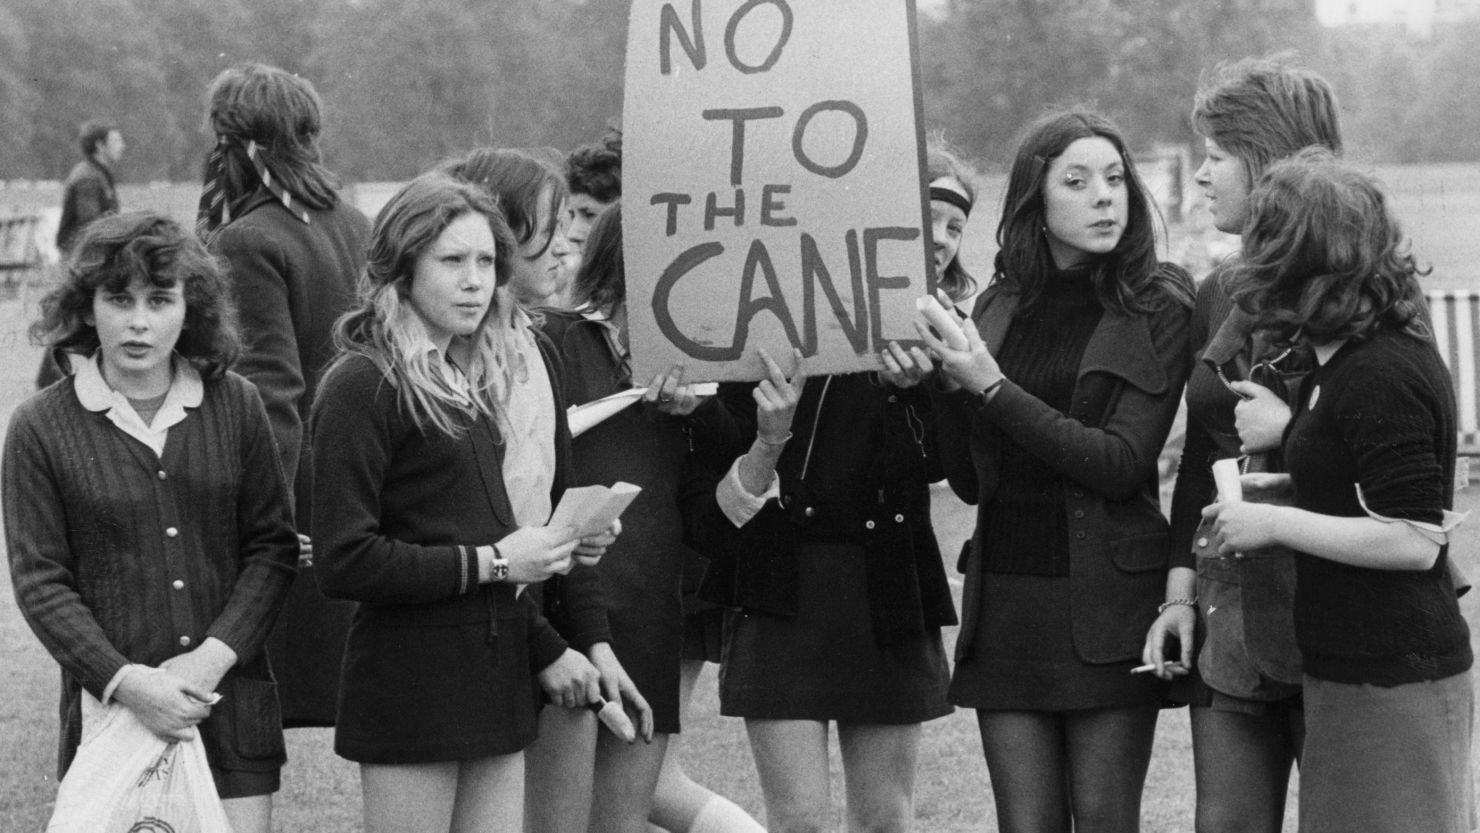 School children hold a demonstration in London's Hyde Park in 1972 against caning in schools.